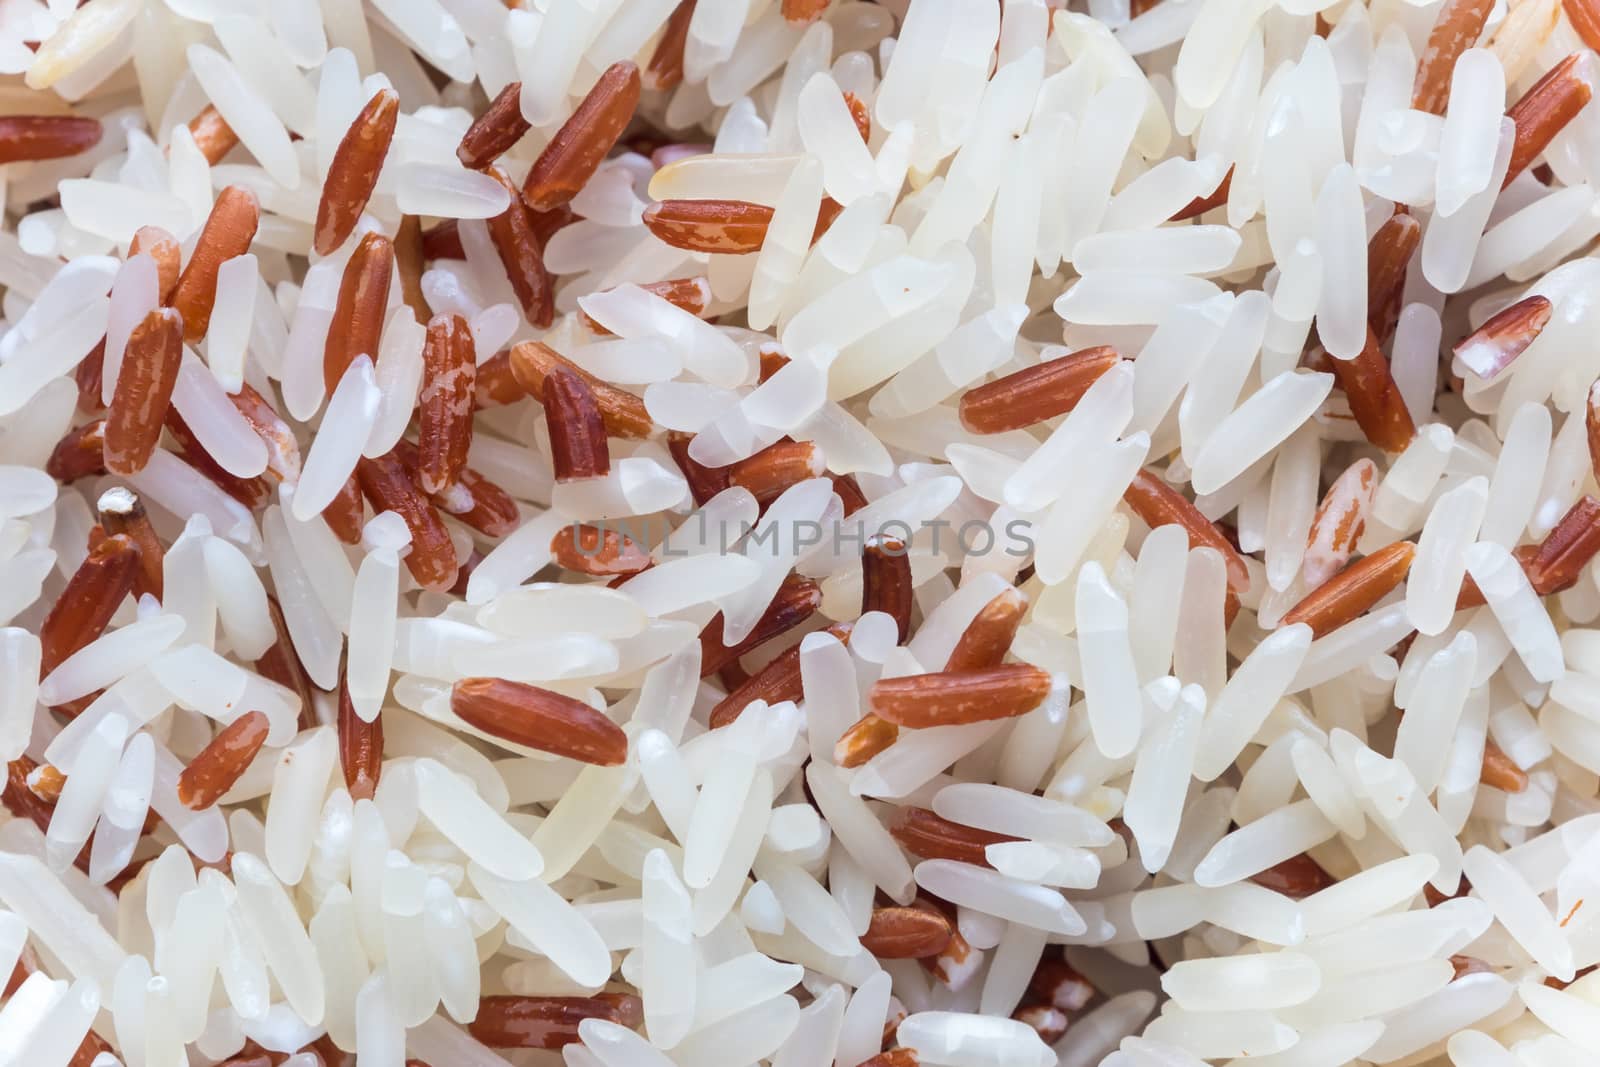 Mixed rice of white rice and brown rice prepare for cook